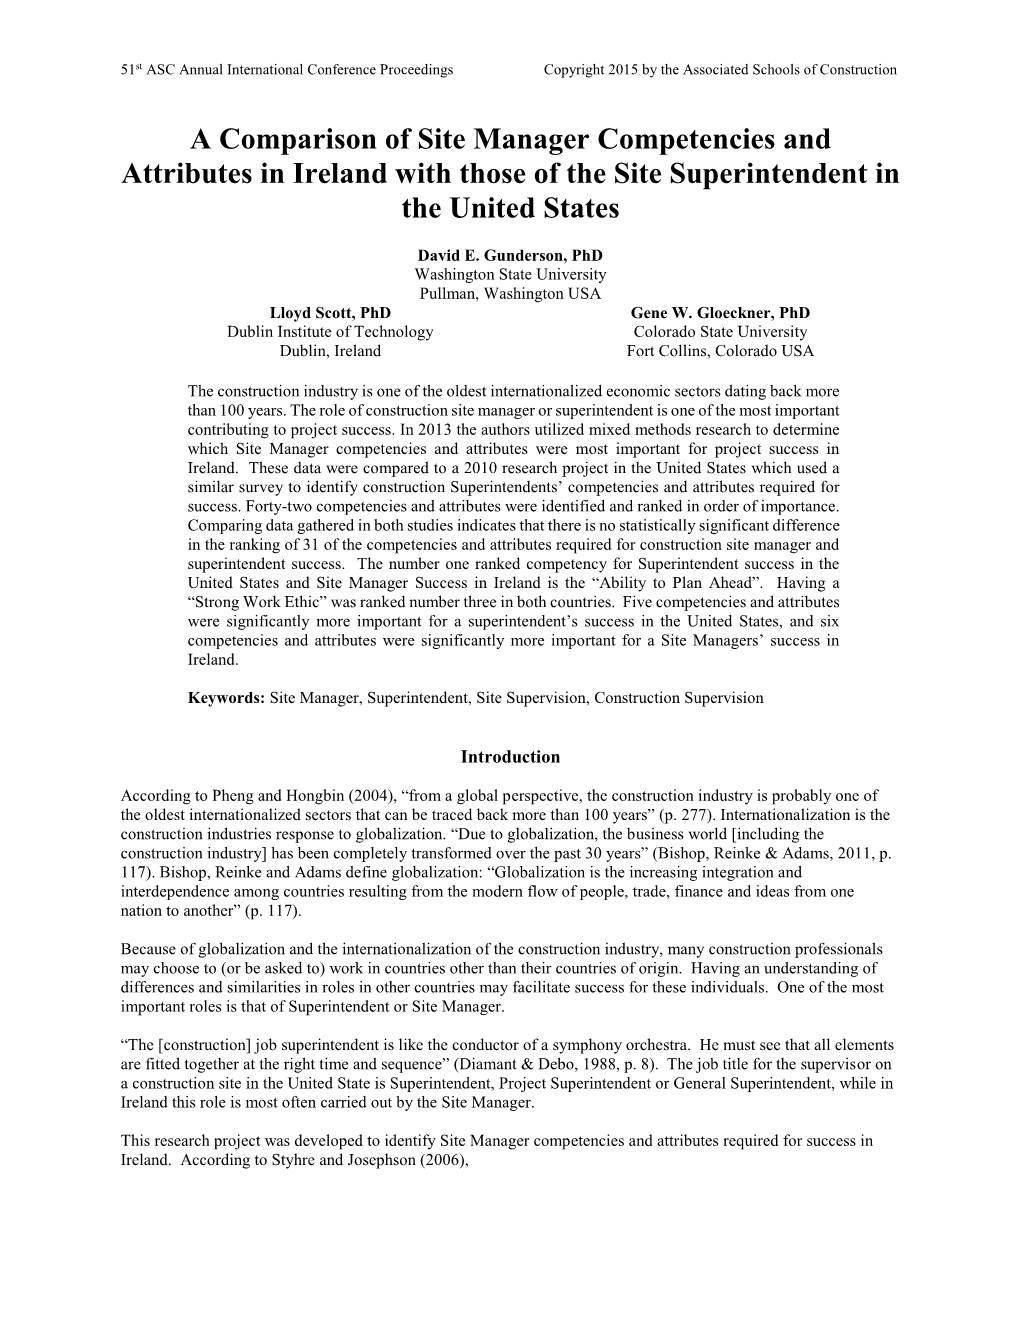 A Comparison of Site Manager Competencies and Attributes in Ireland with Those of the Site Superintendent in the United States